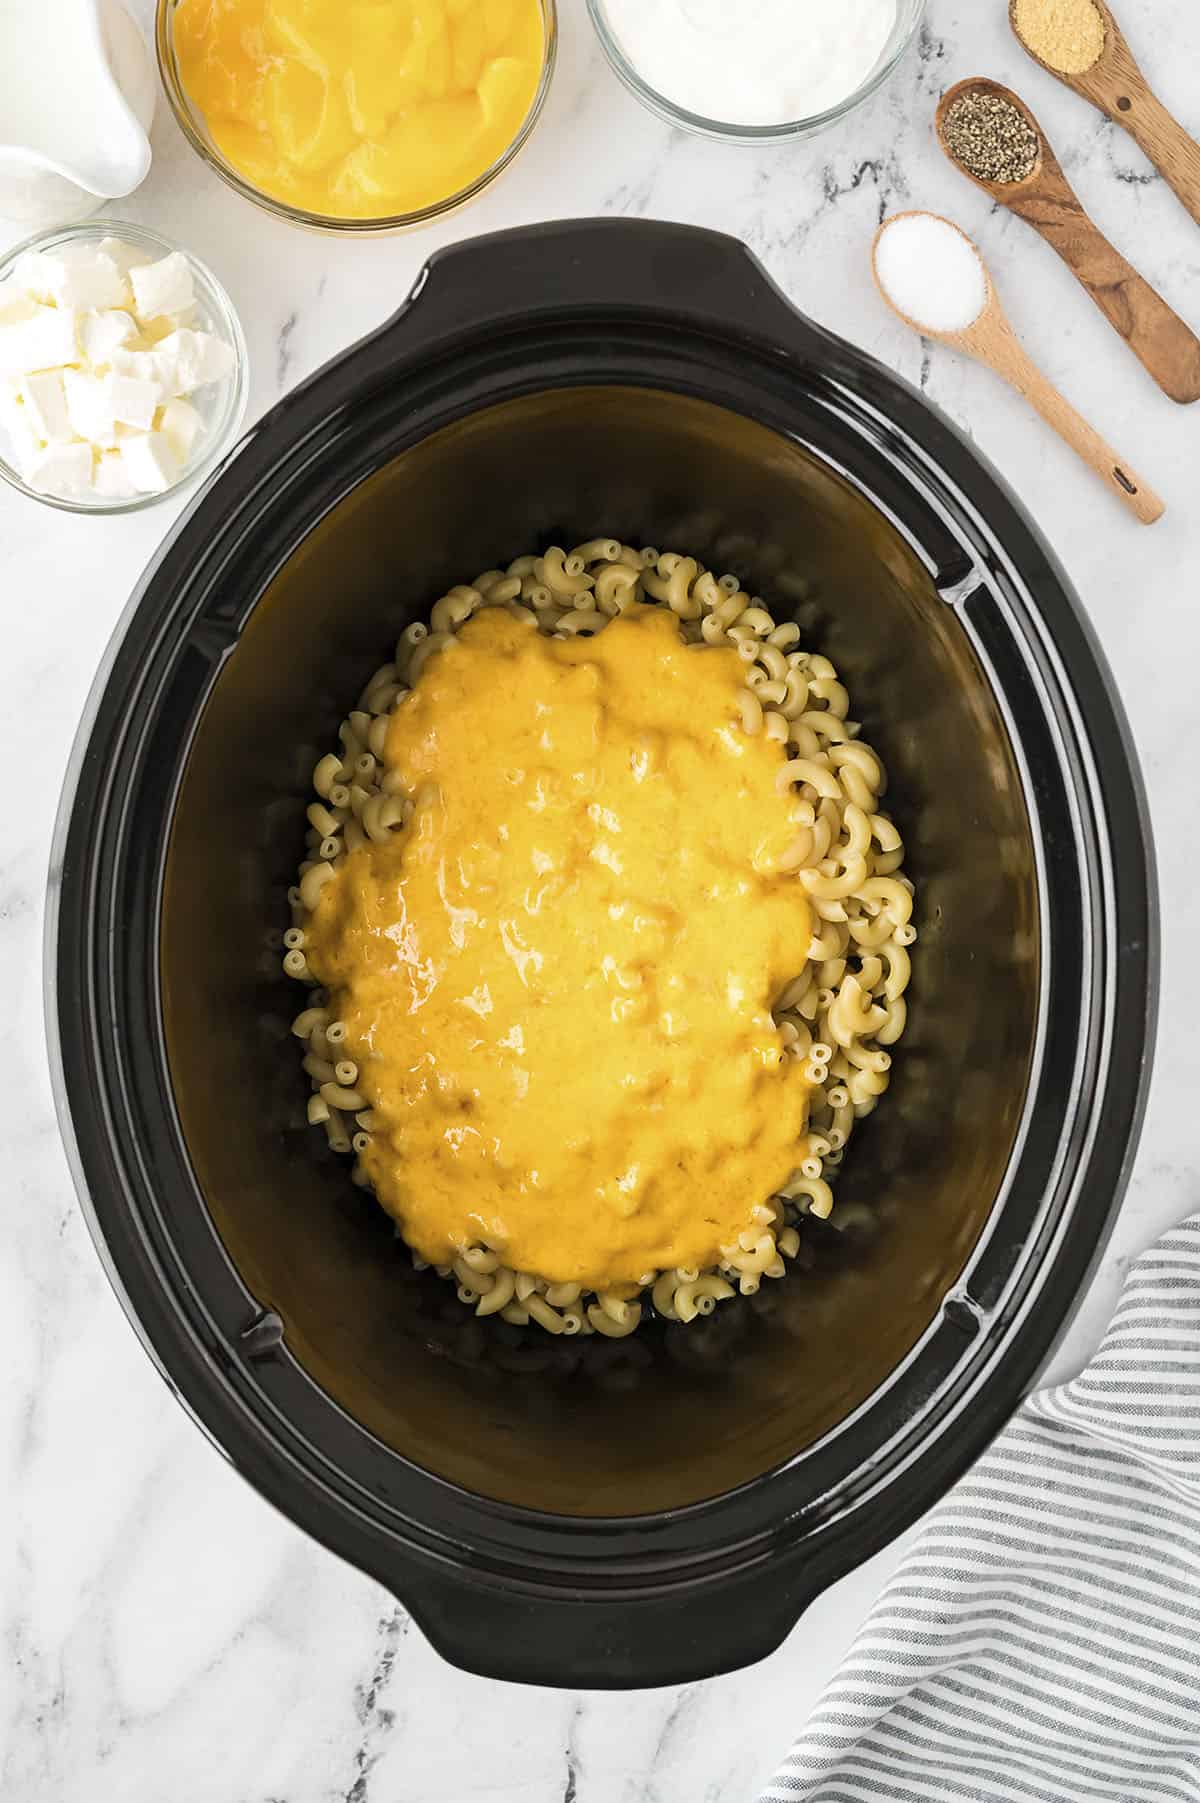 Melted cheese over pasta in crockpot.